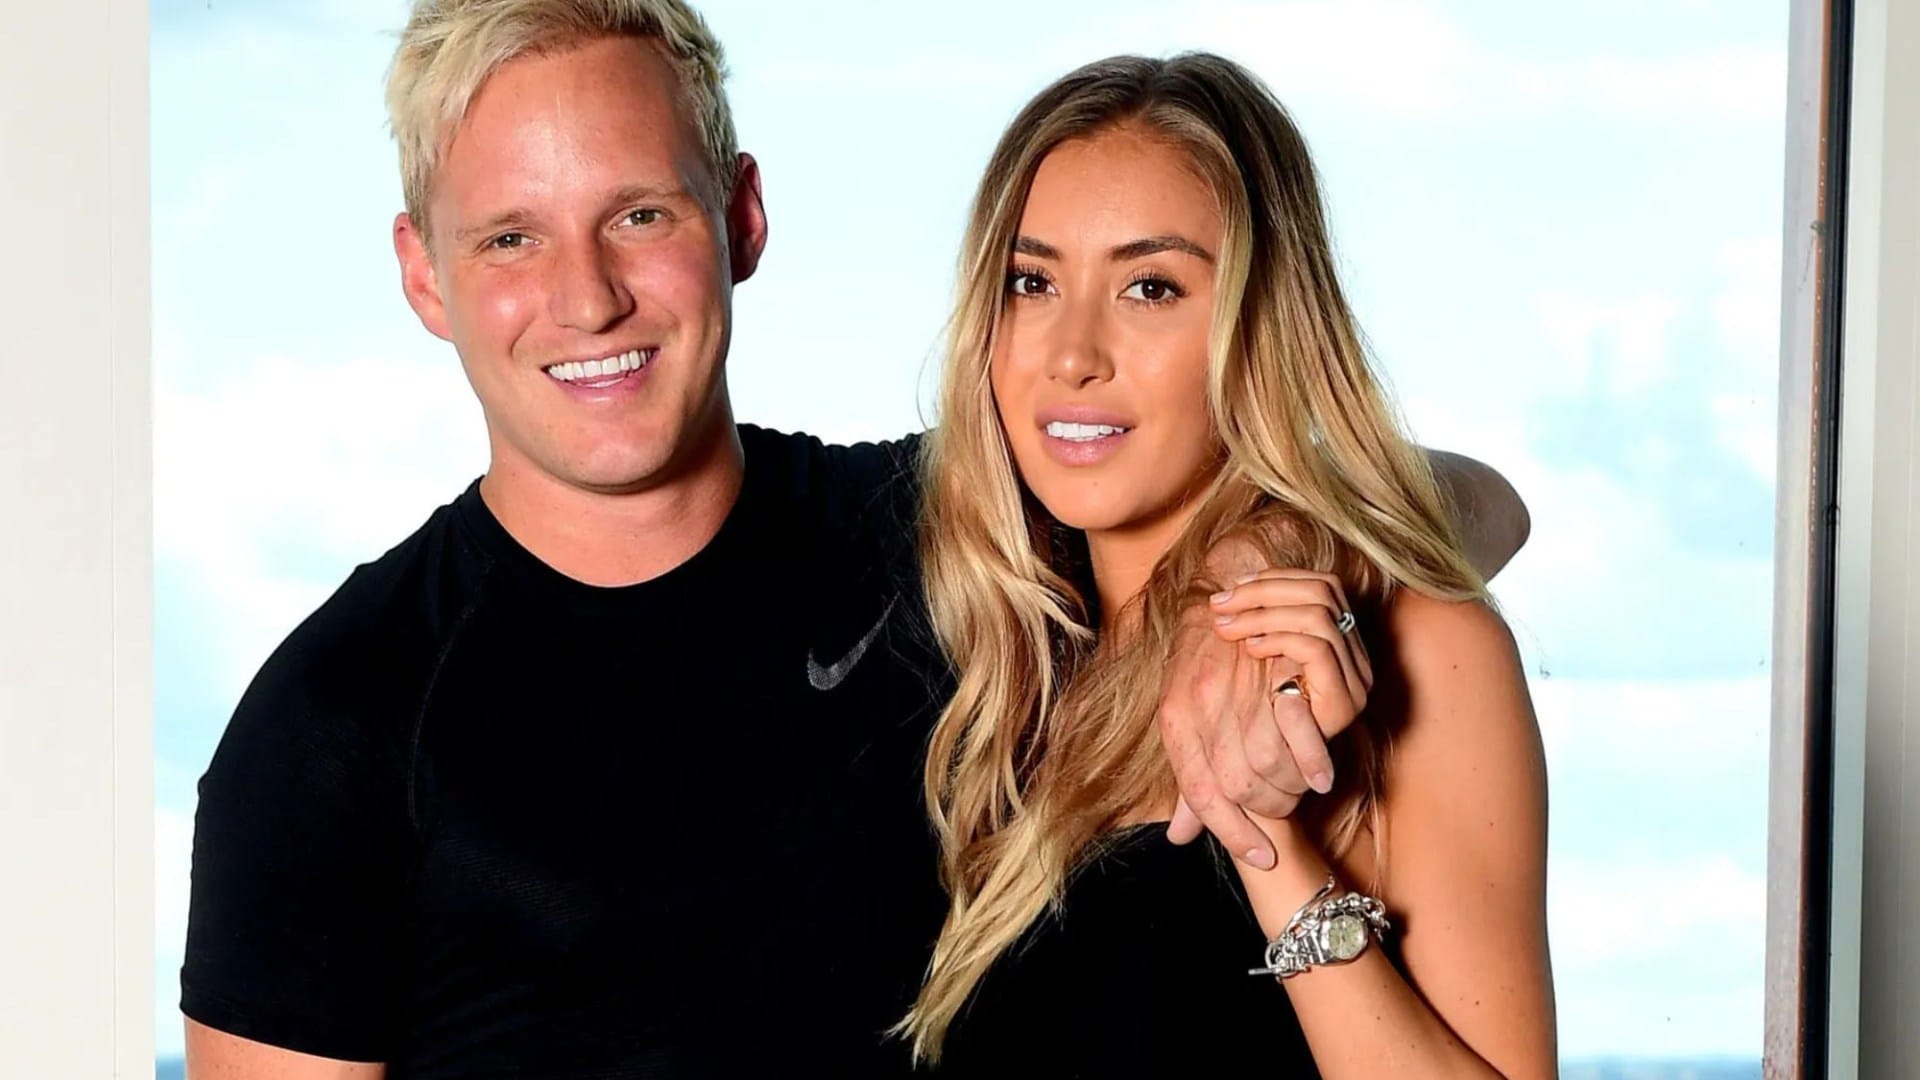 Jamie Laing makes startling confession about sex with wife Sophie Habboo and reveals they're having marriage counselling